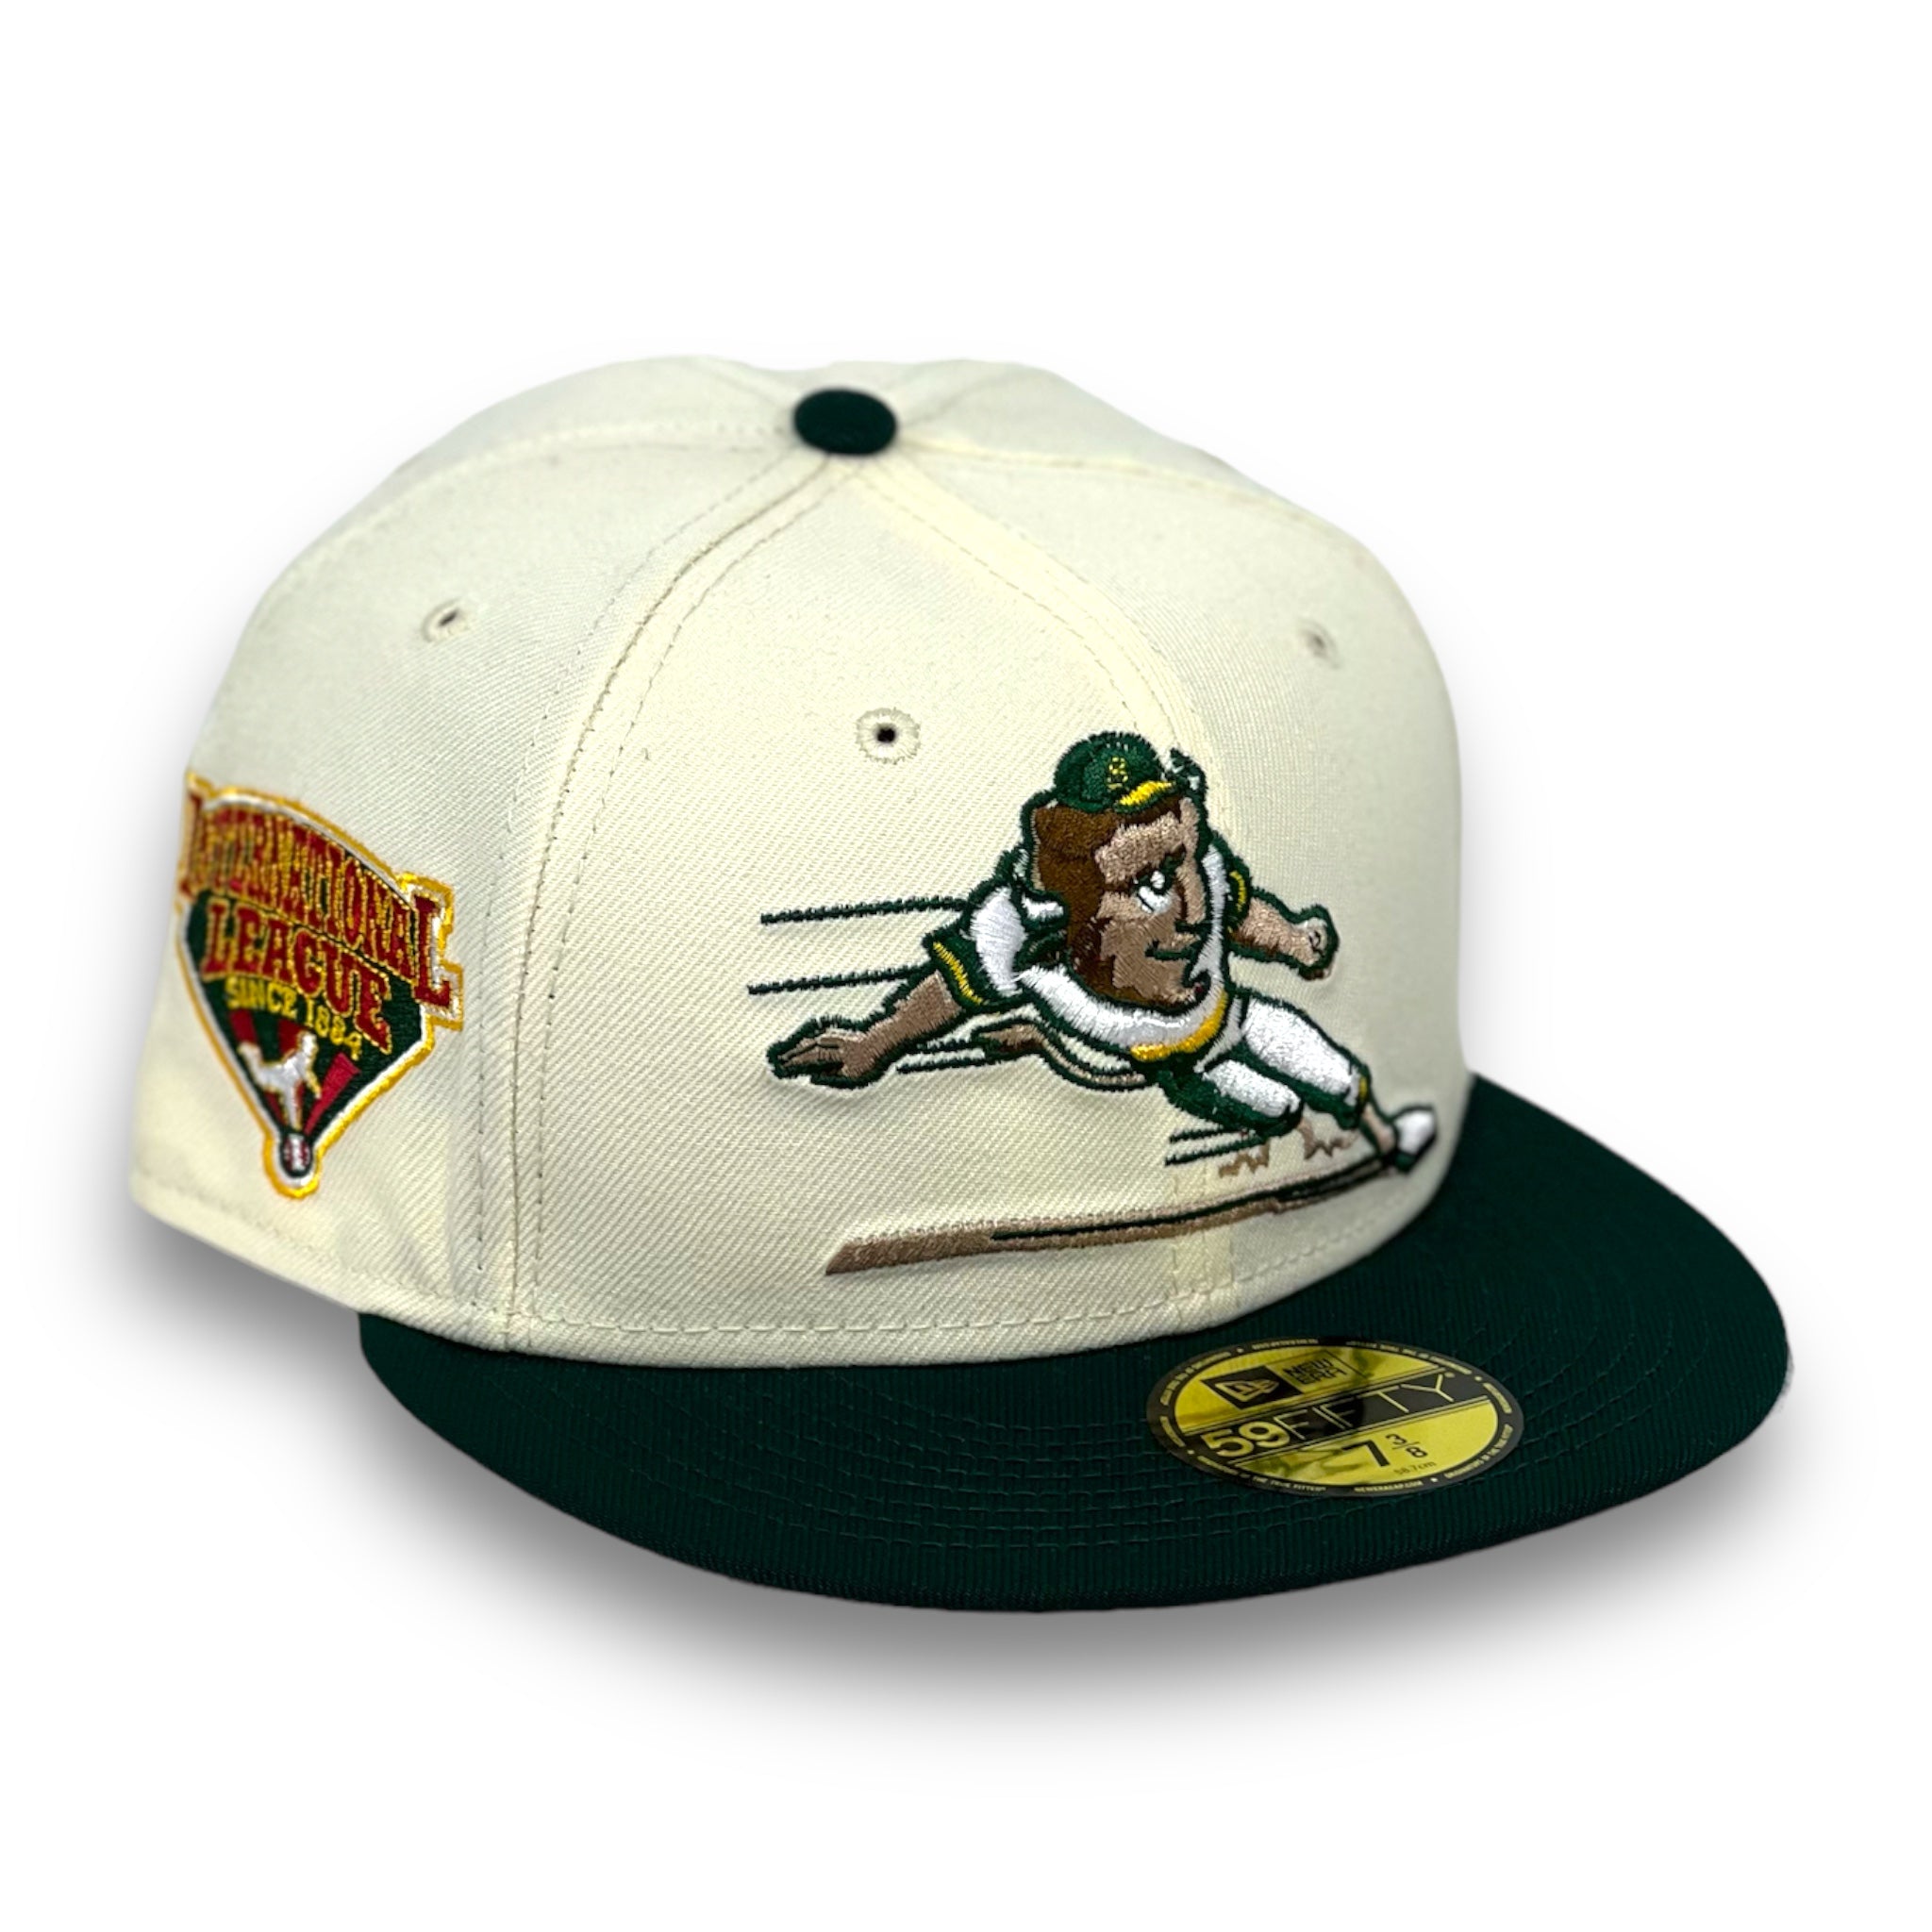 BUFFALO BISONS (OFF-WHITE) (INTERNATIONAL LEAGUE) NEW ERA 59FIFTY FITTED